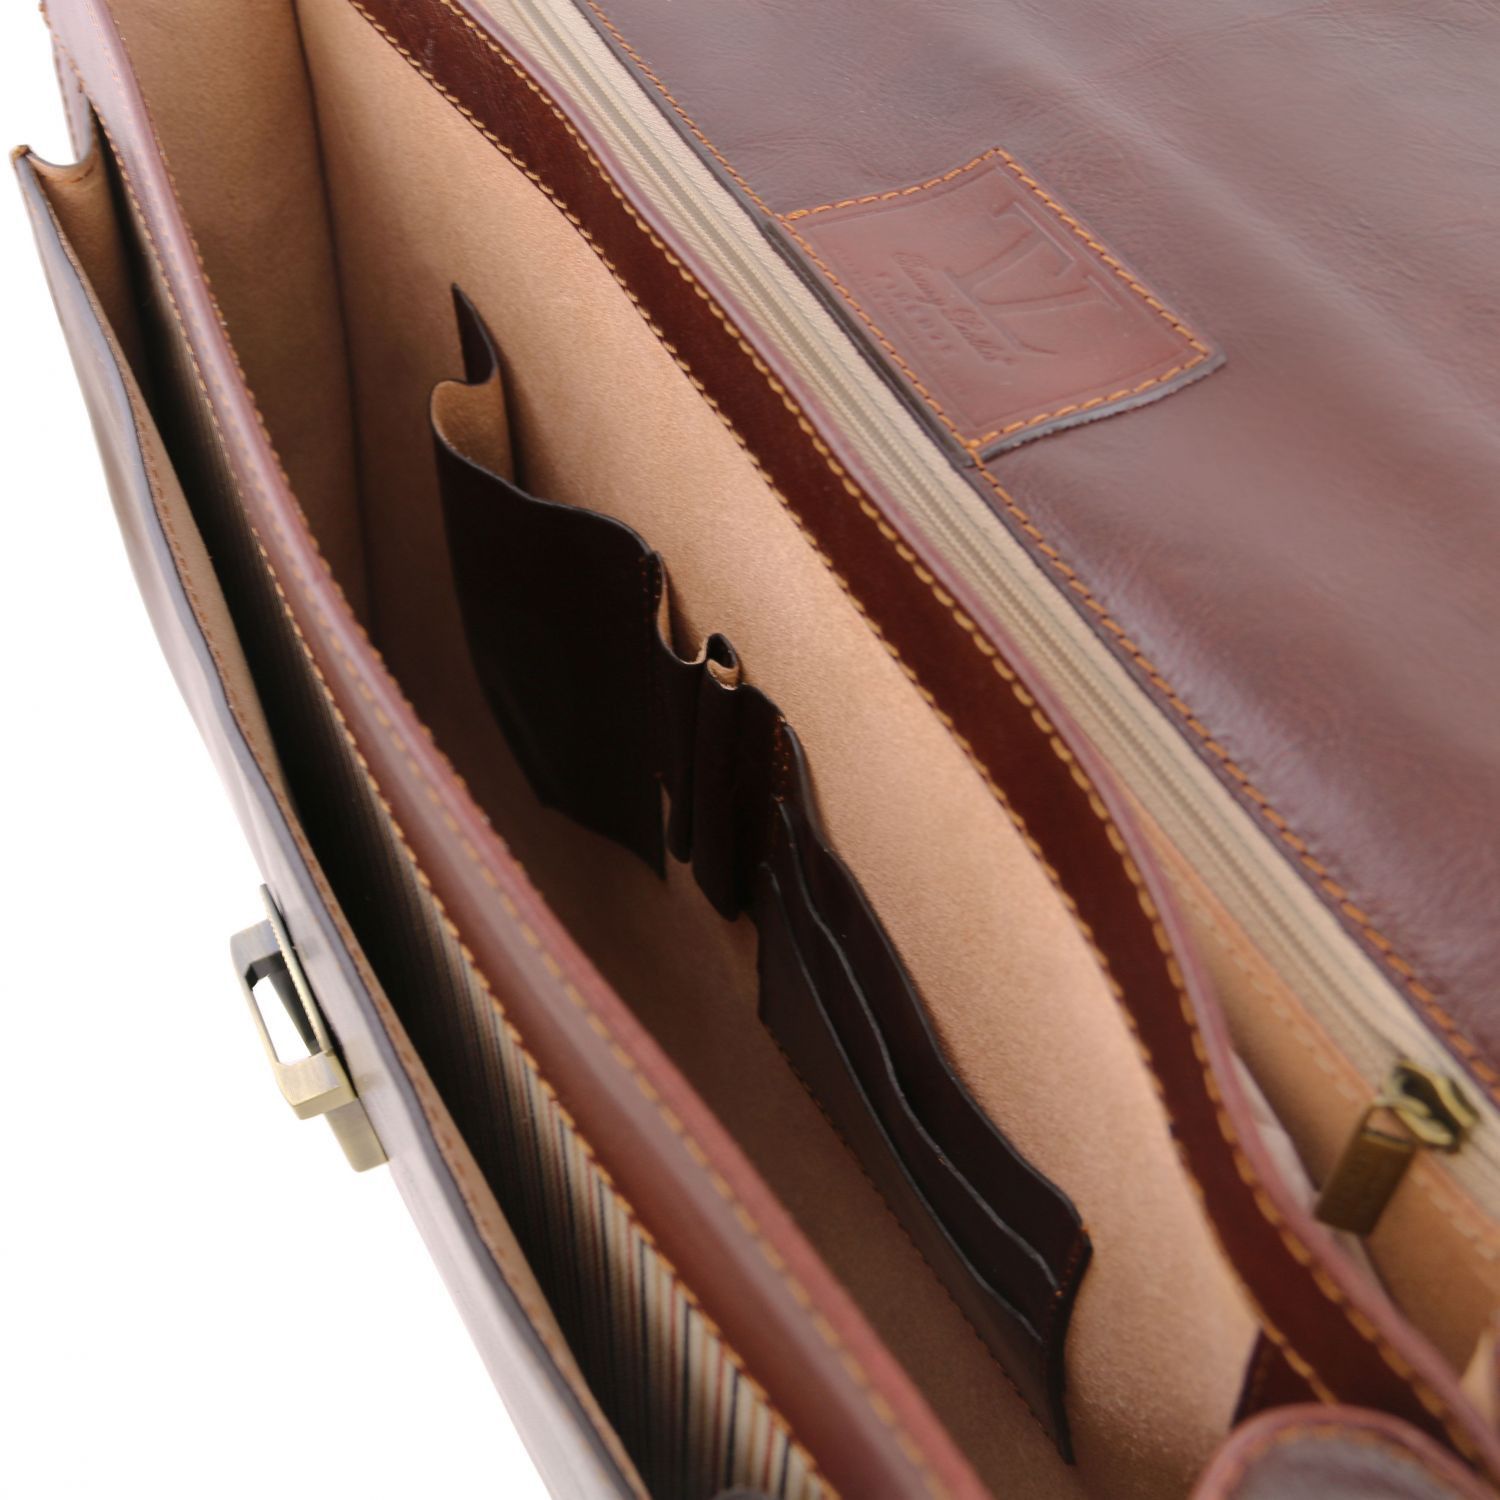 Front Pocket Leather Briefcase